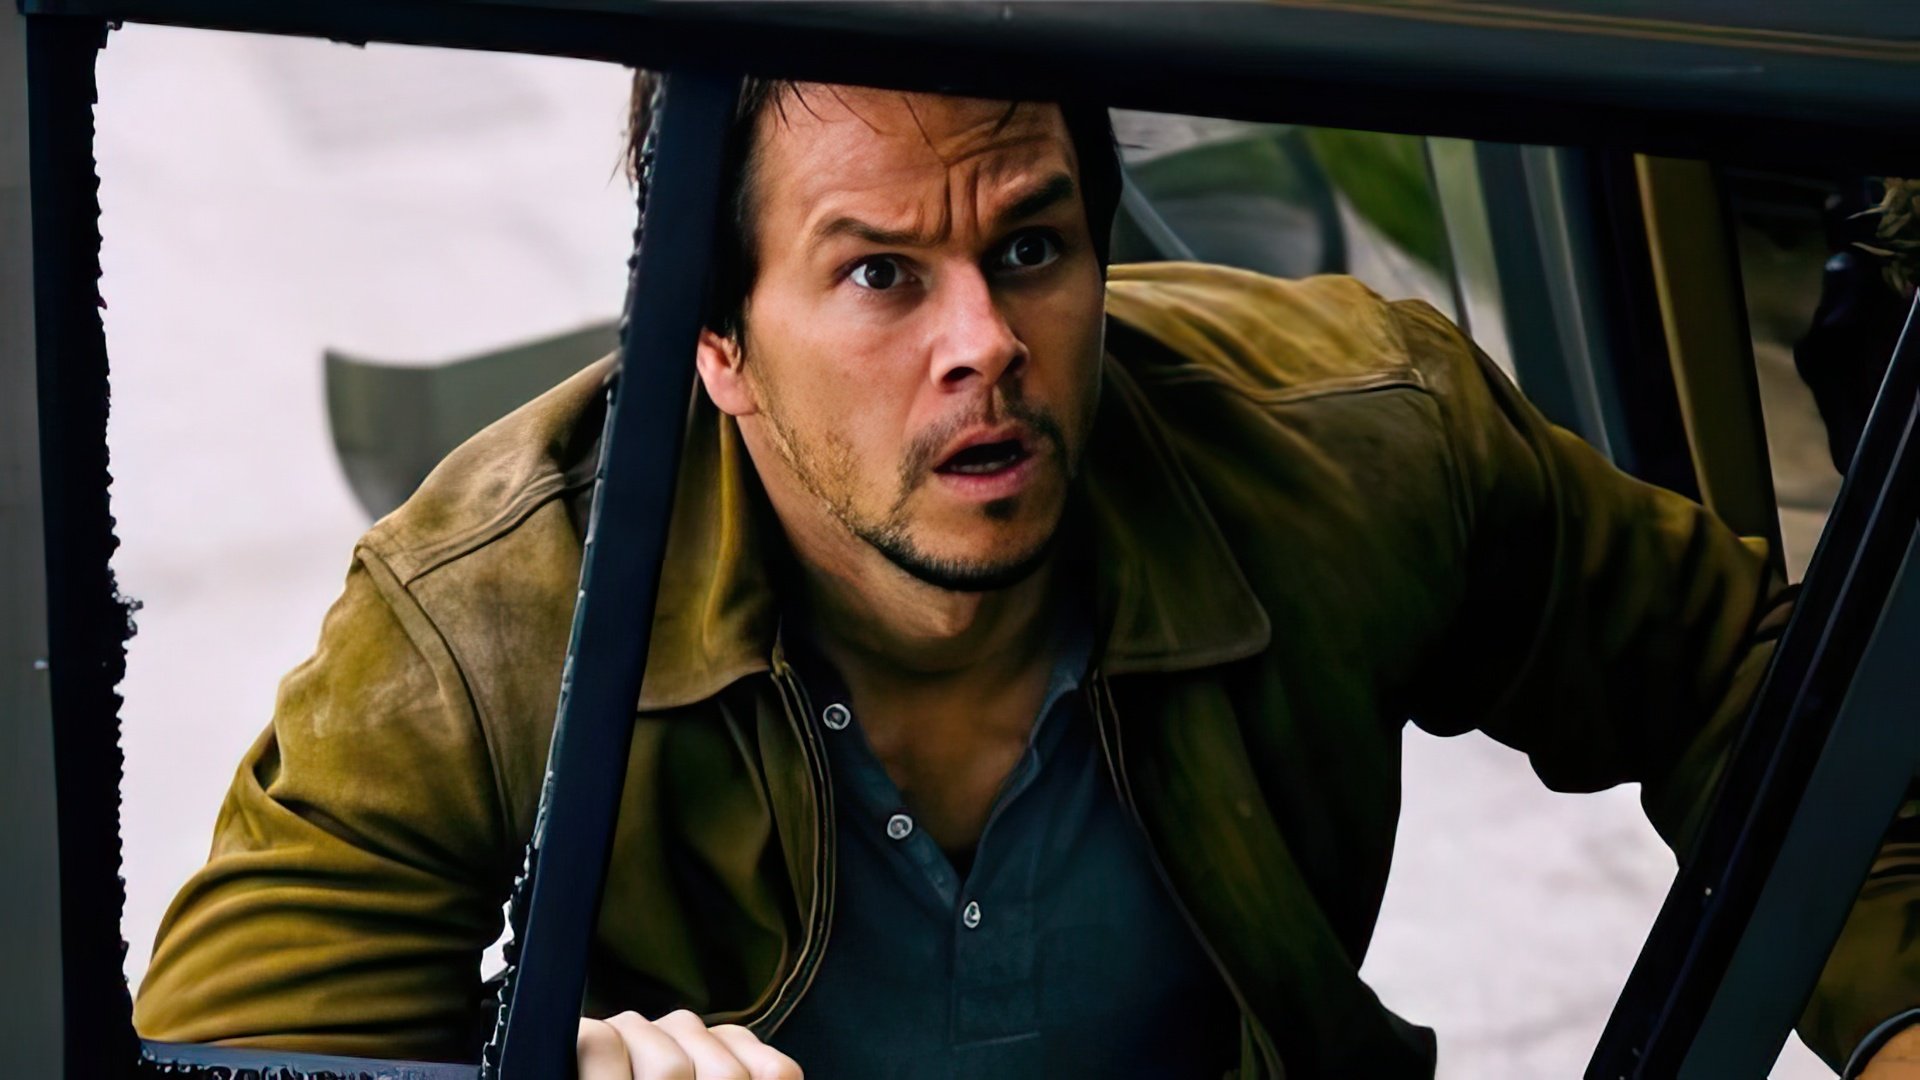 Mark Wahlberg is a part of the Transformers franchise, since 2014